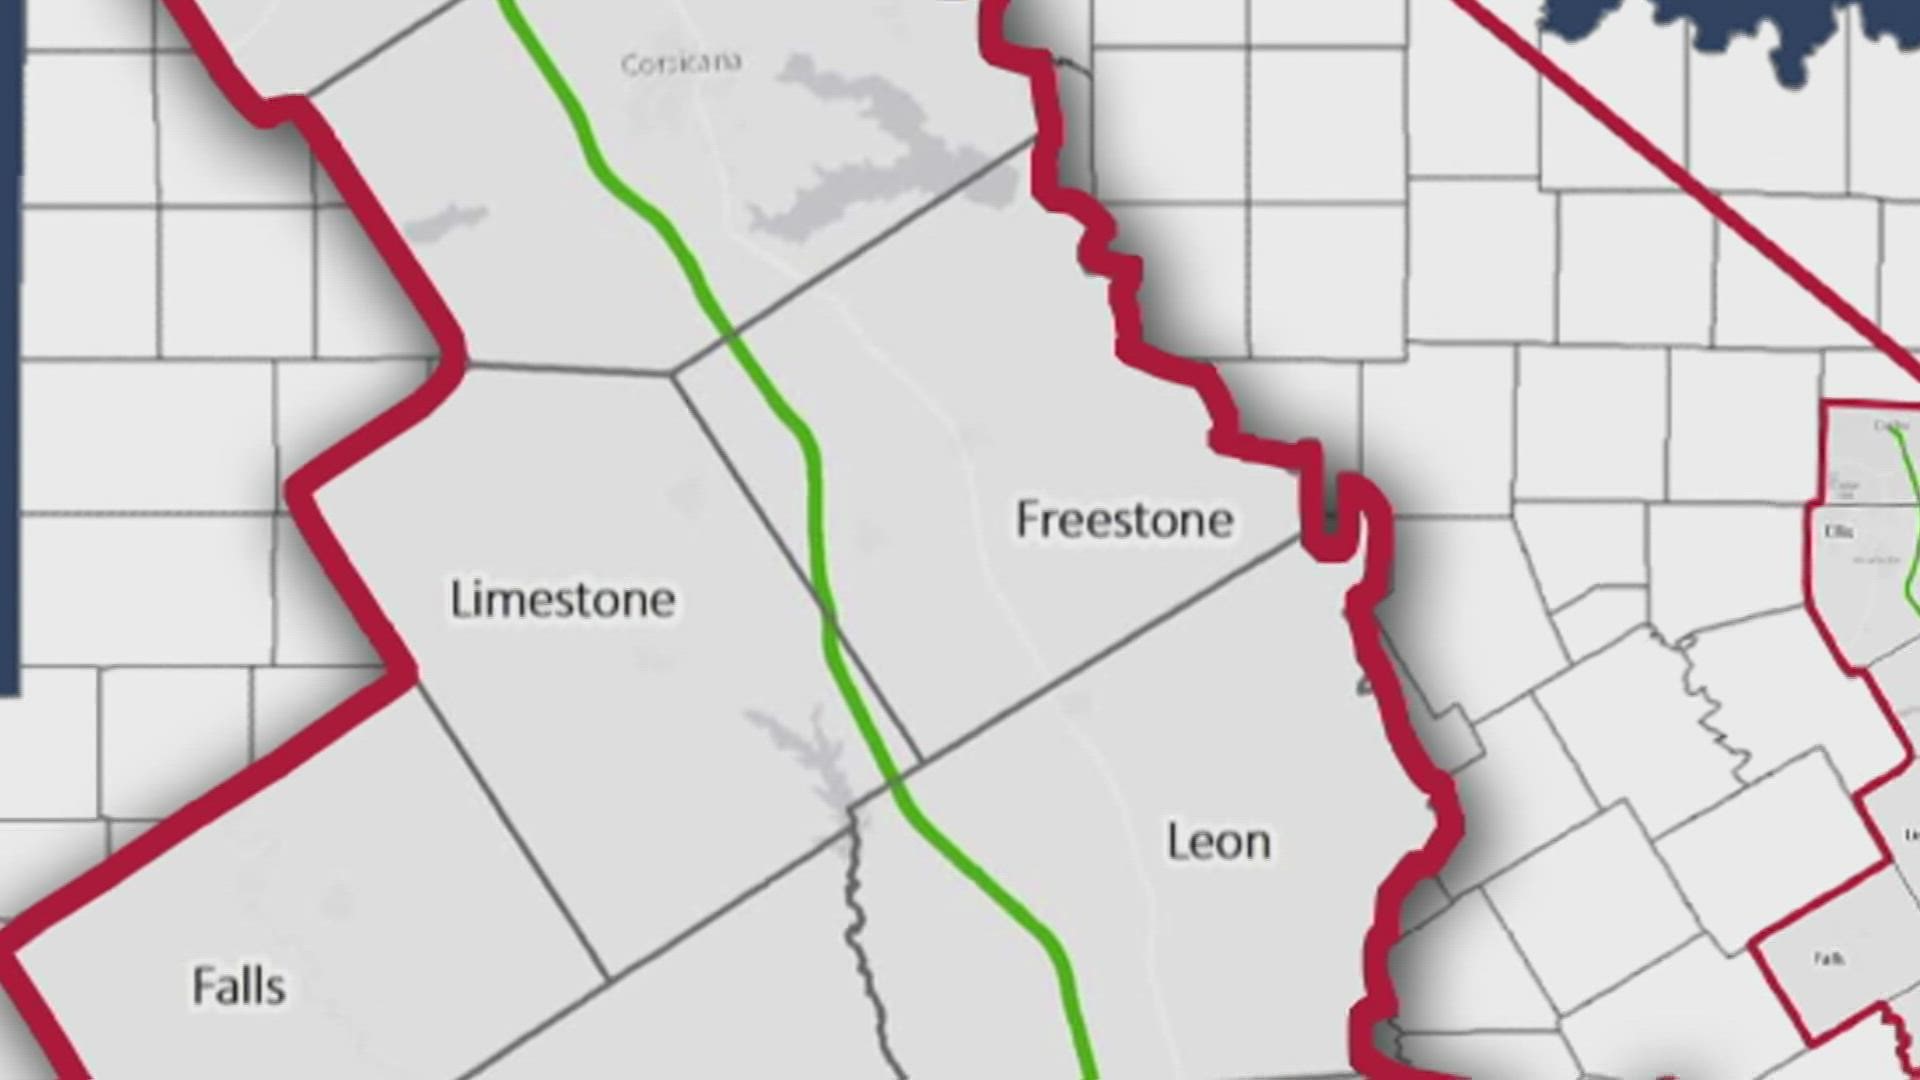 Texas State Supreme Court ruled 5-3 in favor of train project seizing private land.